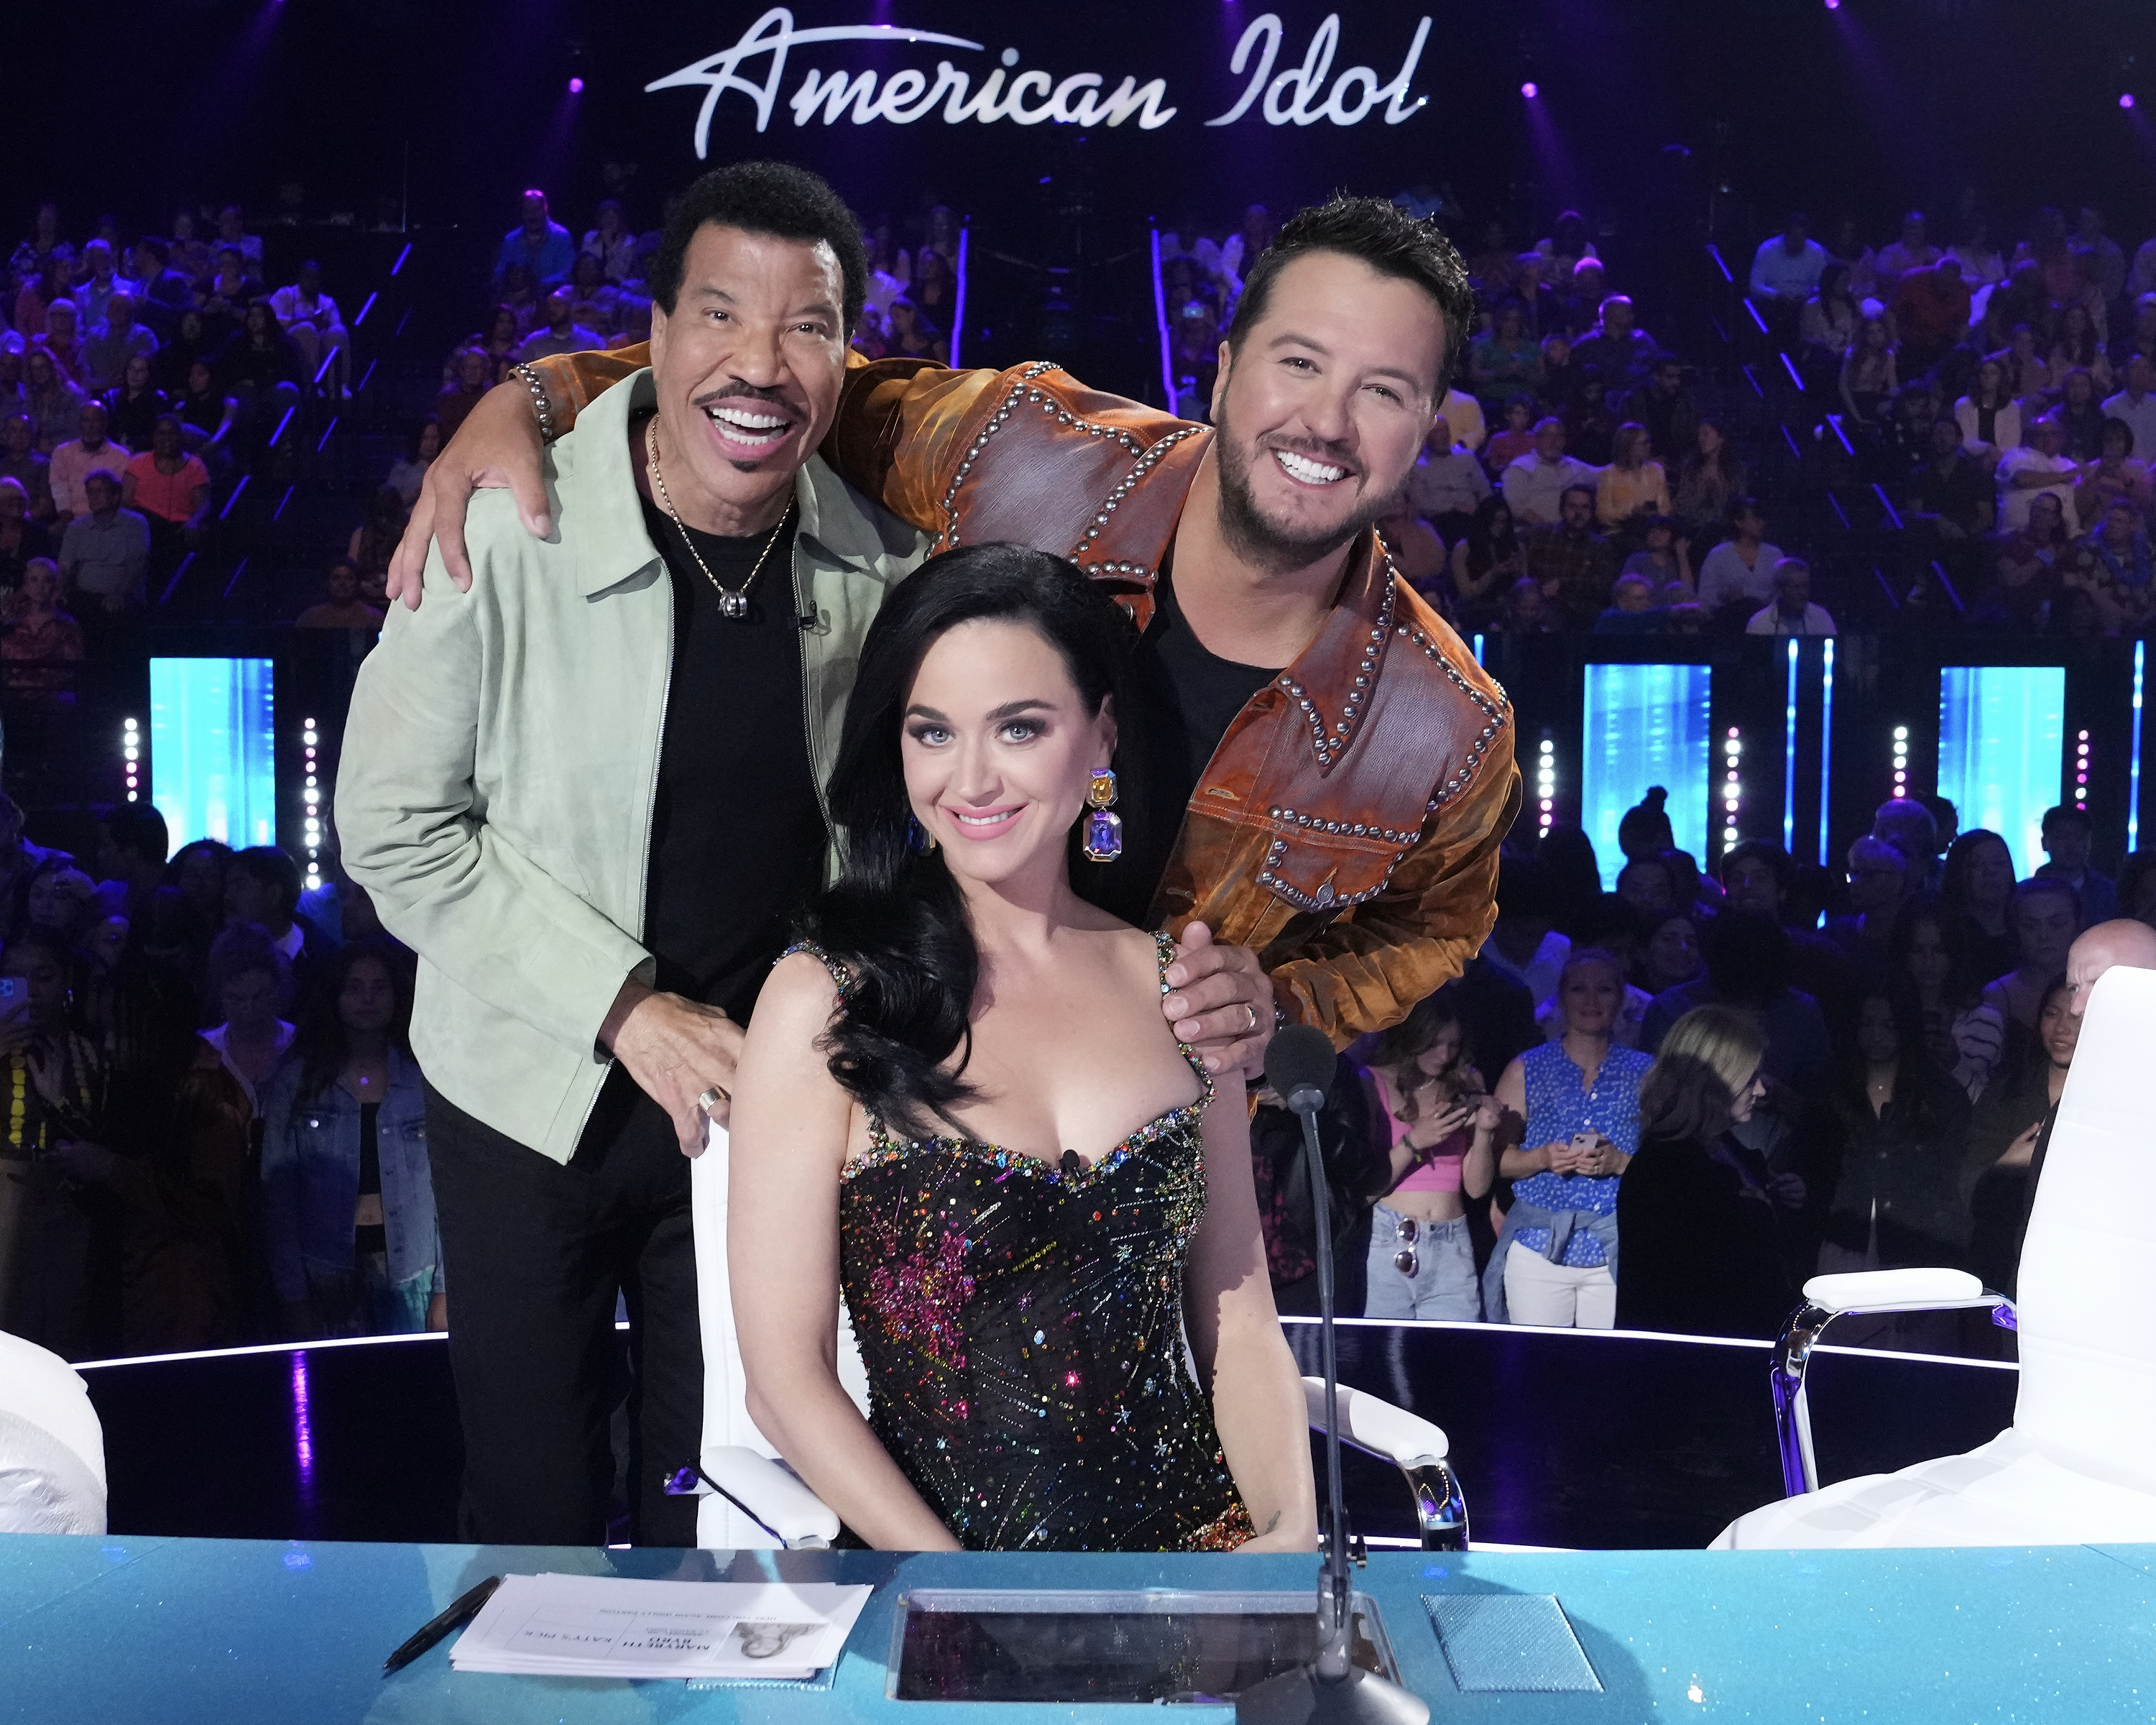 Katy pictured with fellow judges Luke Bryan and Lionel Richie on the set of American Idol